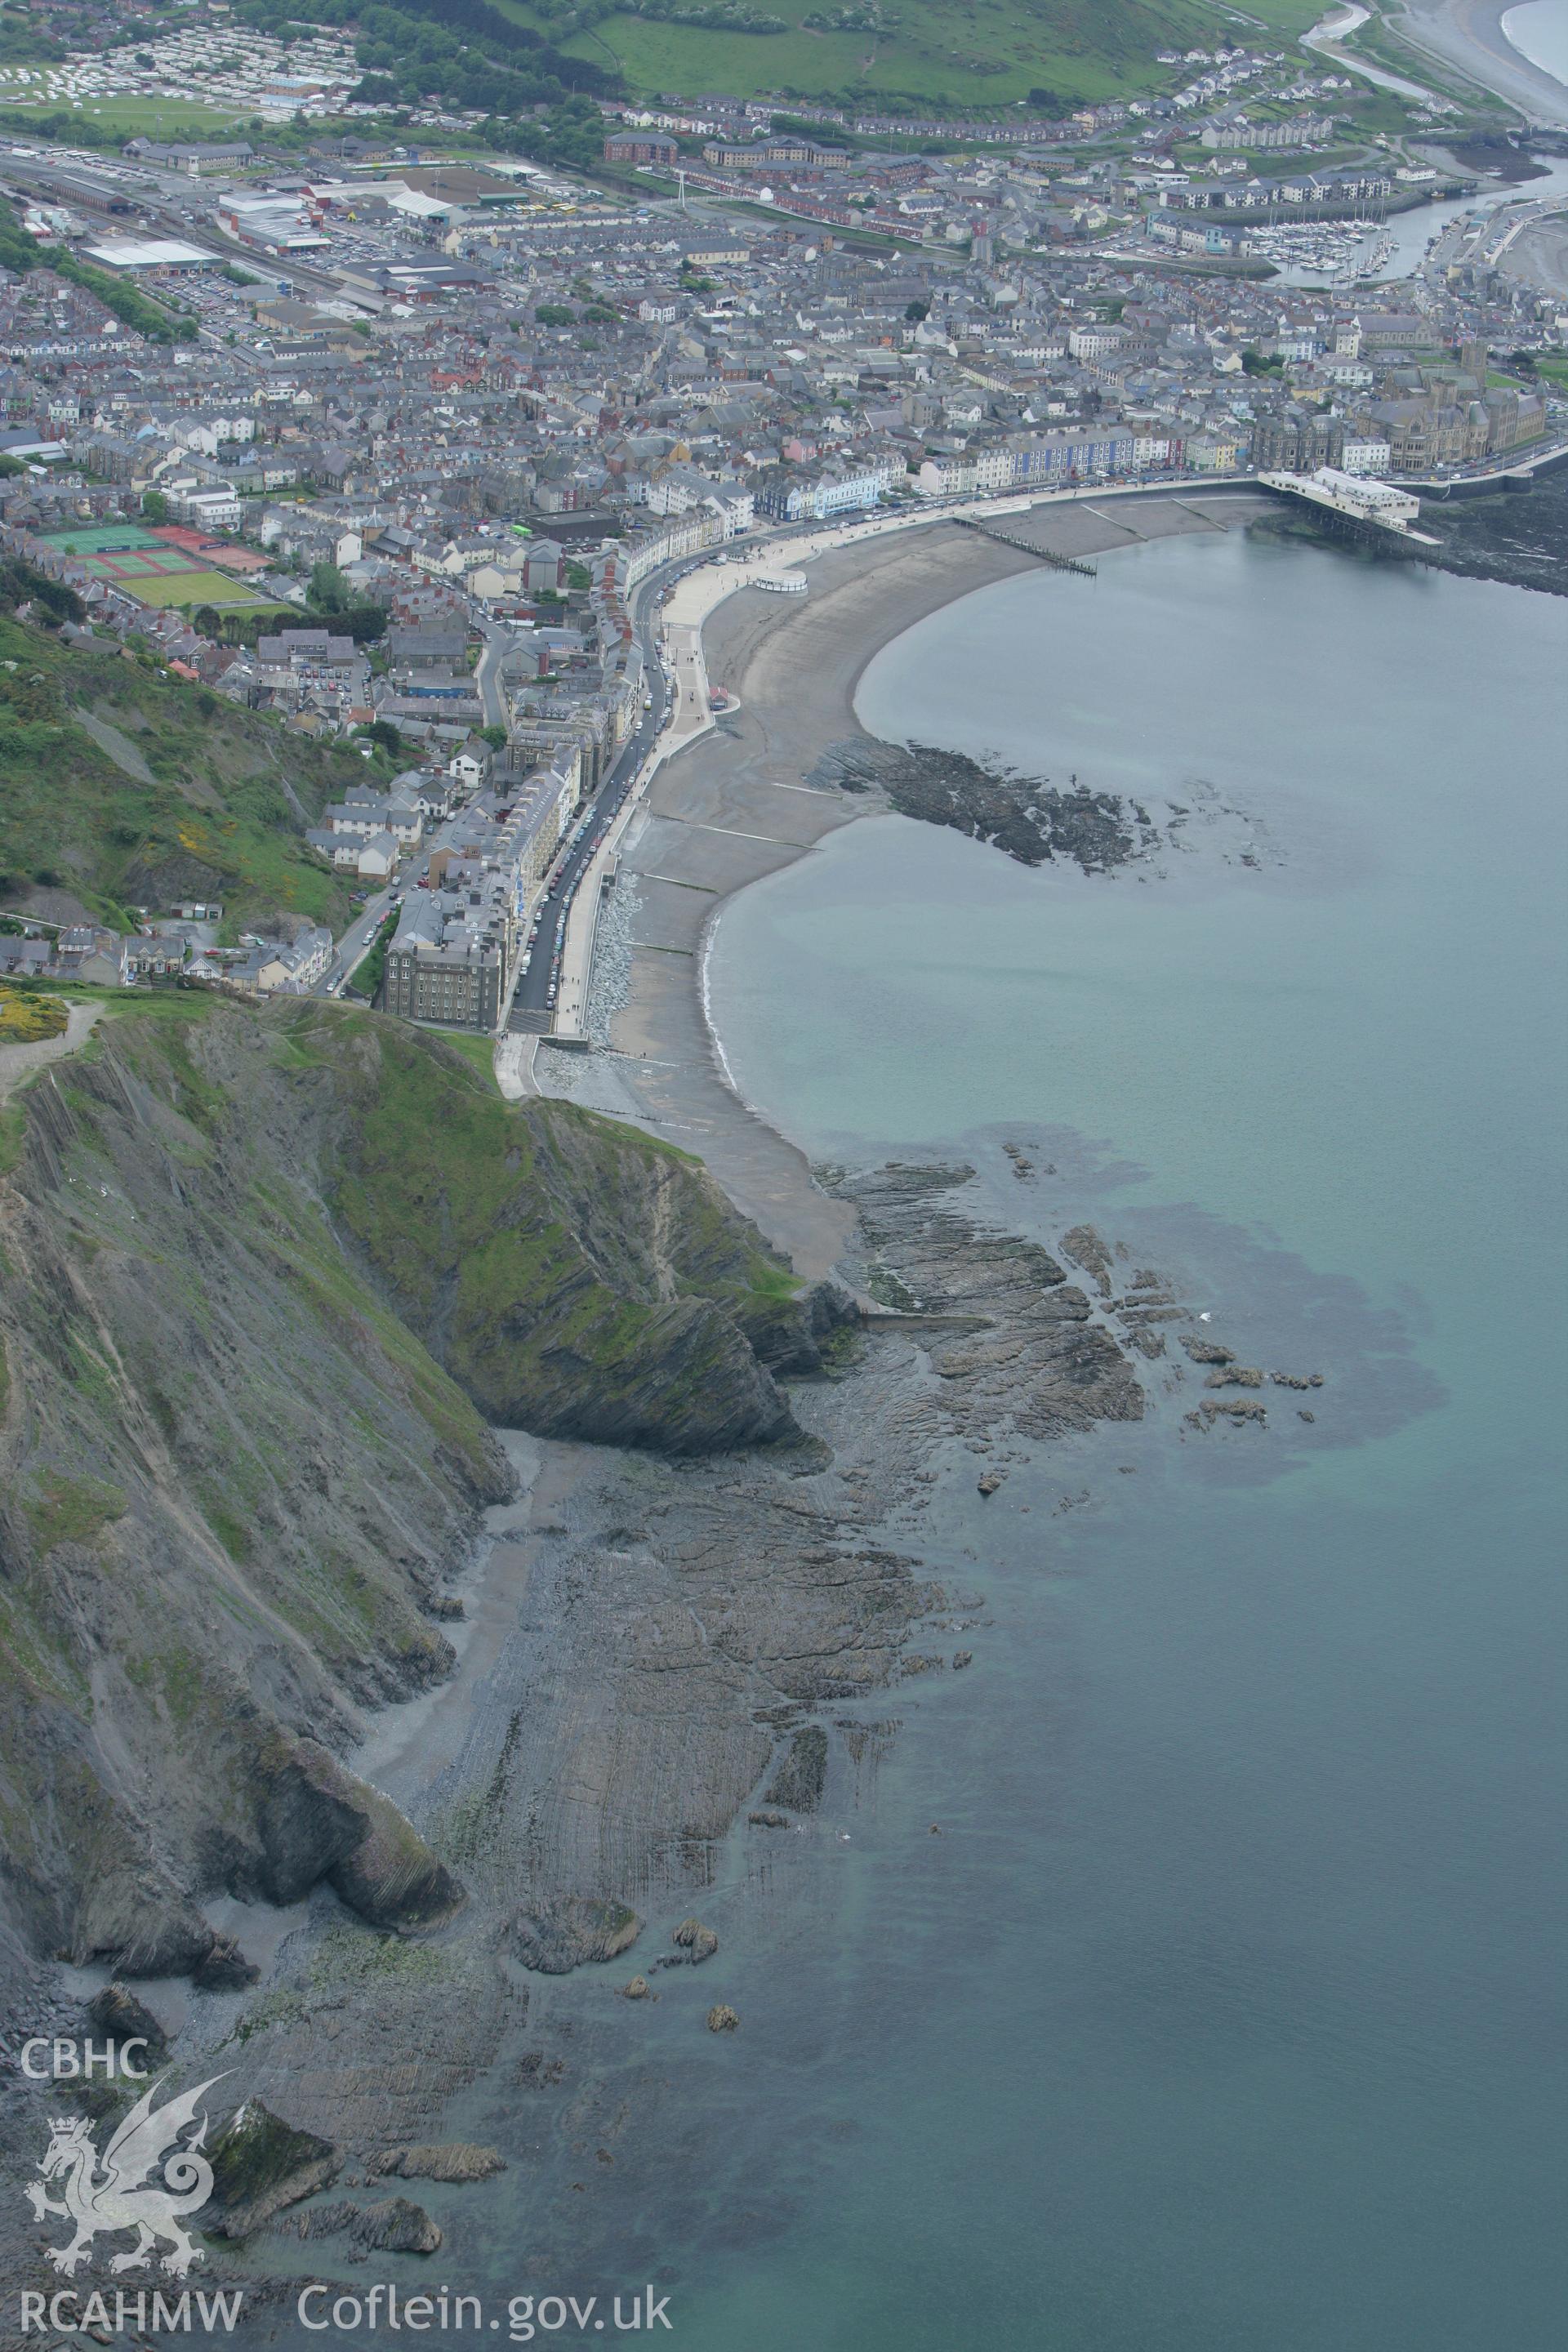 RCAHMW colour oblique photograph of Aberystwyth from Constitution Hill. Taken by Toby Driver on 20/05/2008.